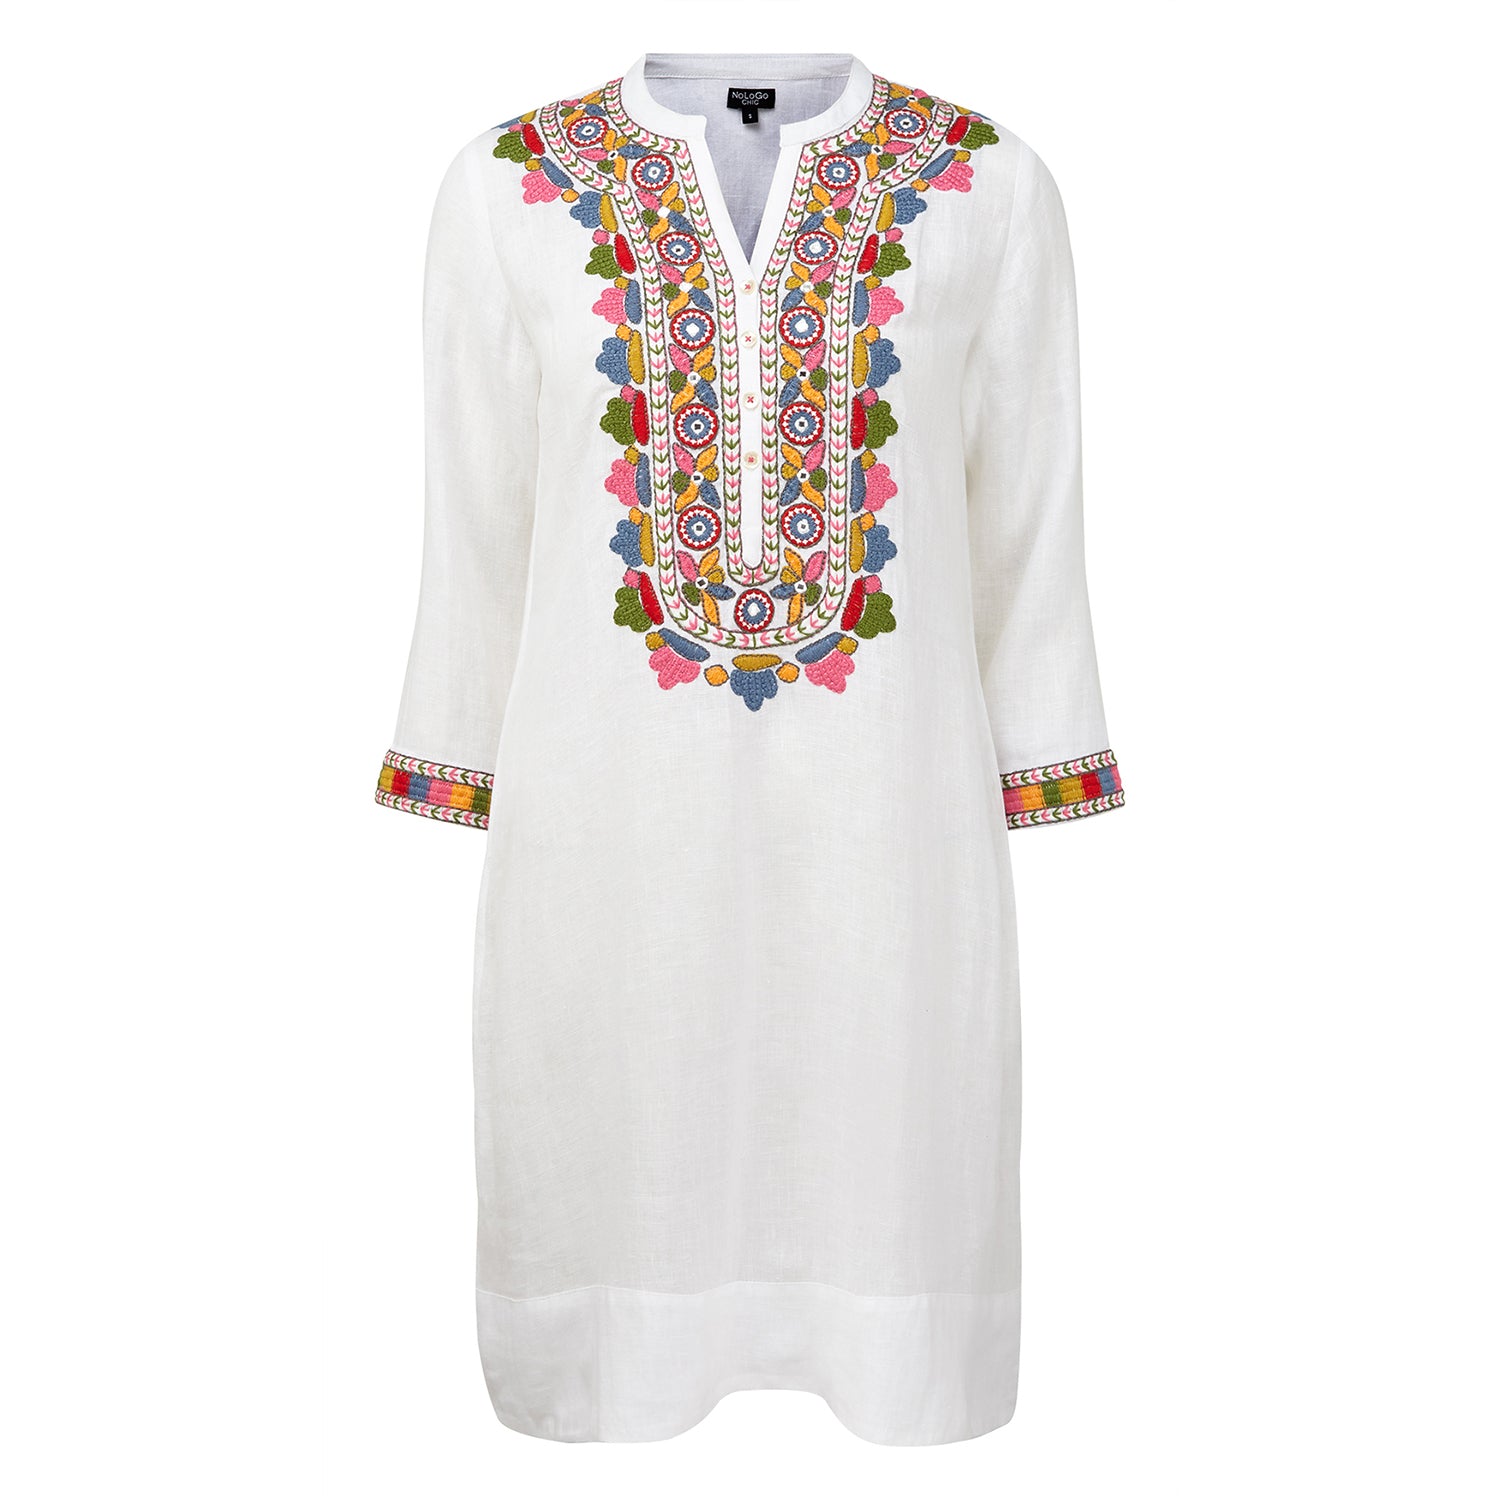 Tribal Embroidered Tunic Dress - White